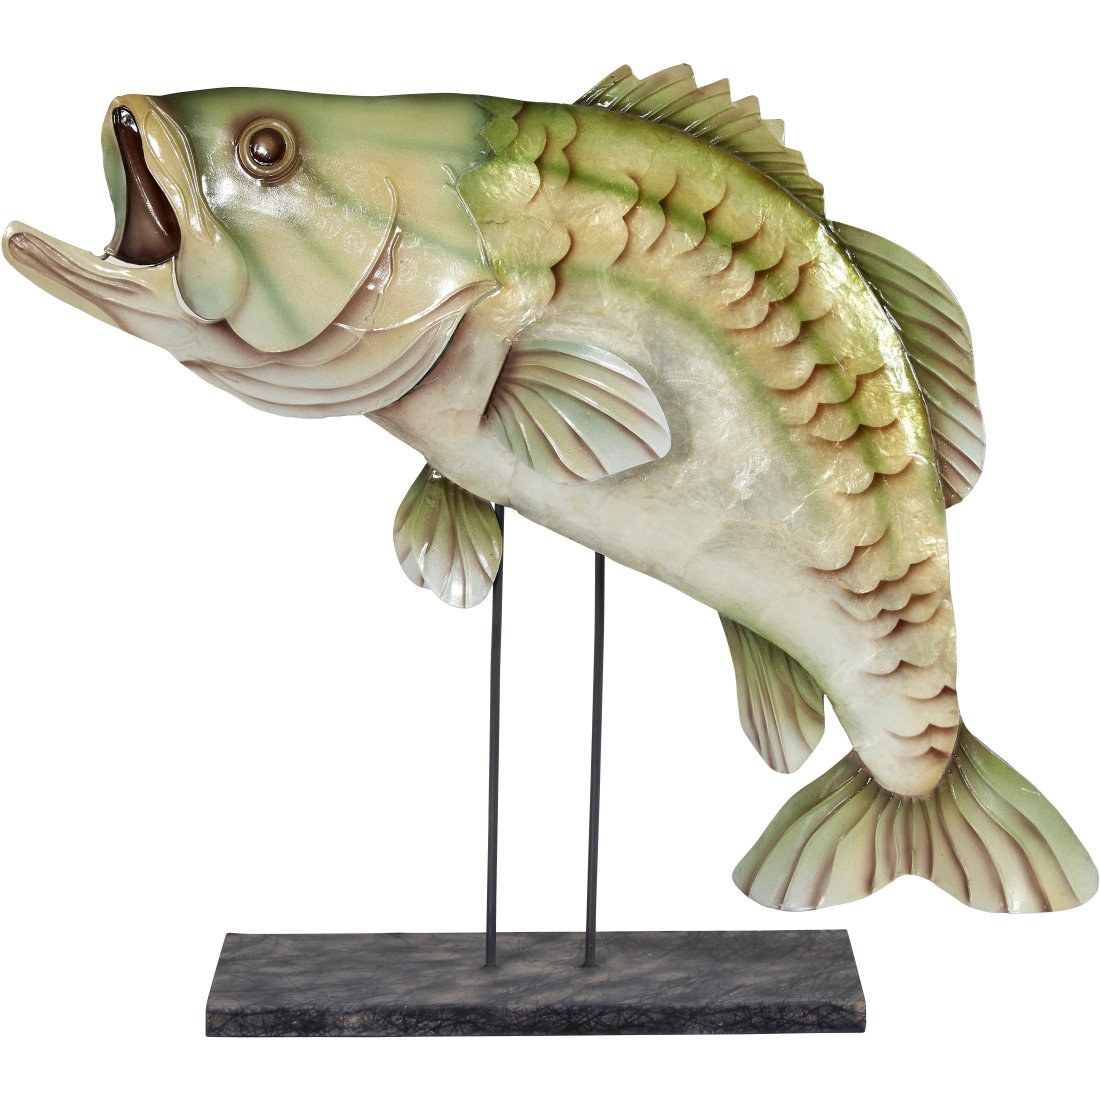 8” Figurine Statue Large Mouth Bass Fish Sculpture